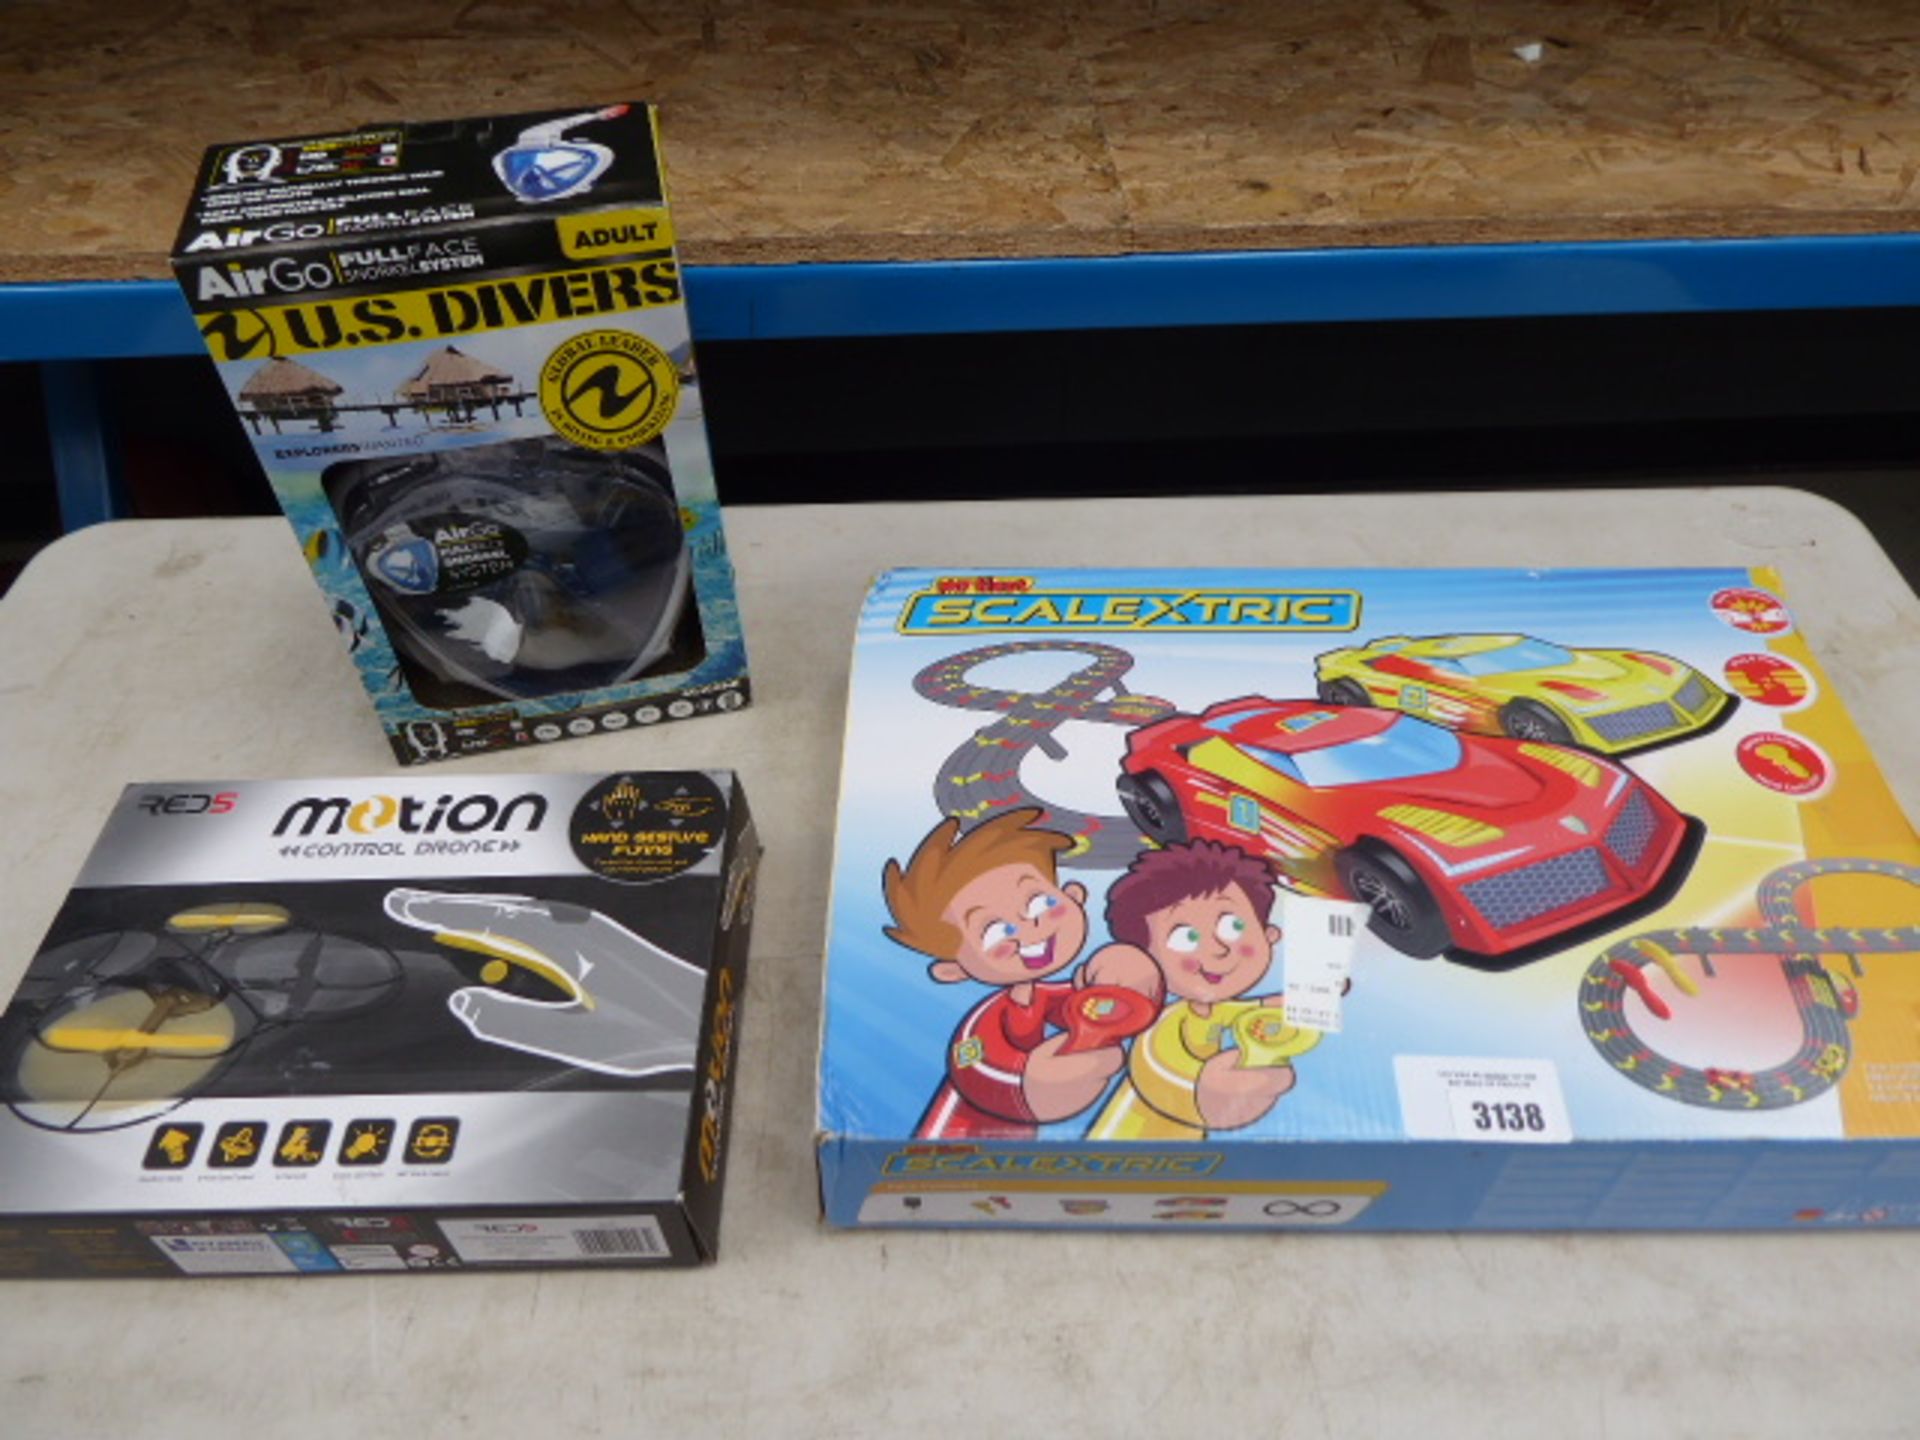 Micro Scalextric set, US divers snorkel mask and motion control drone